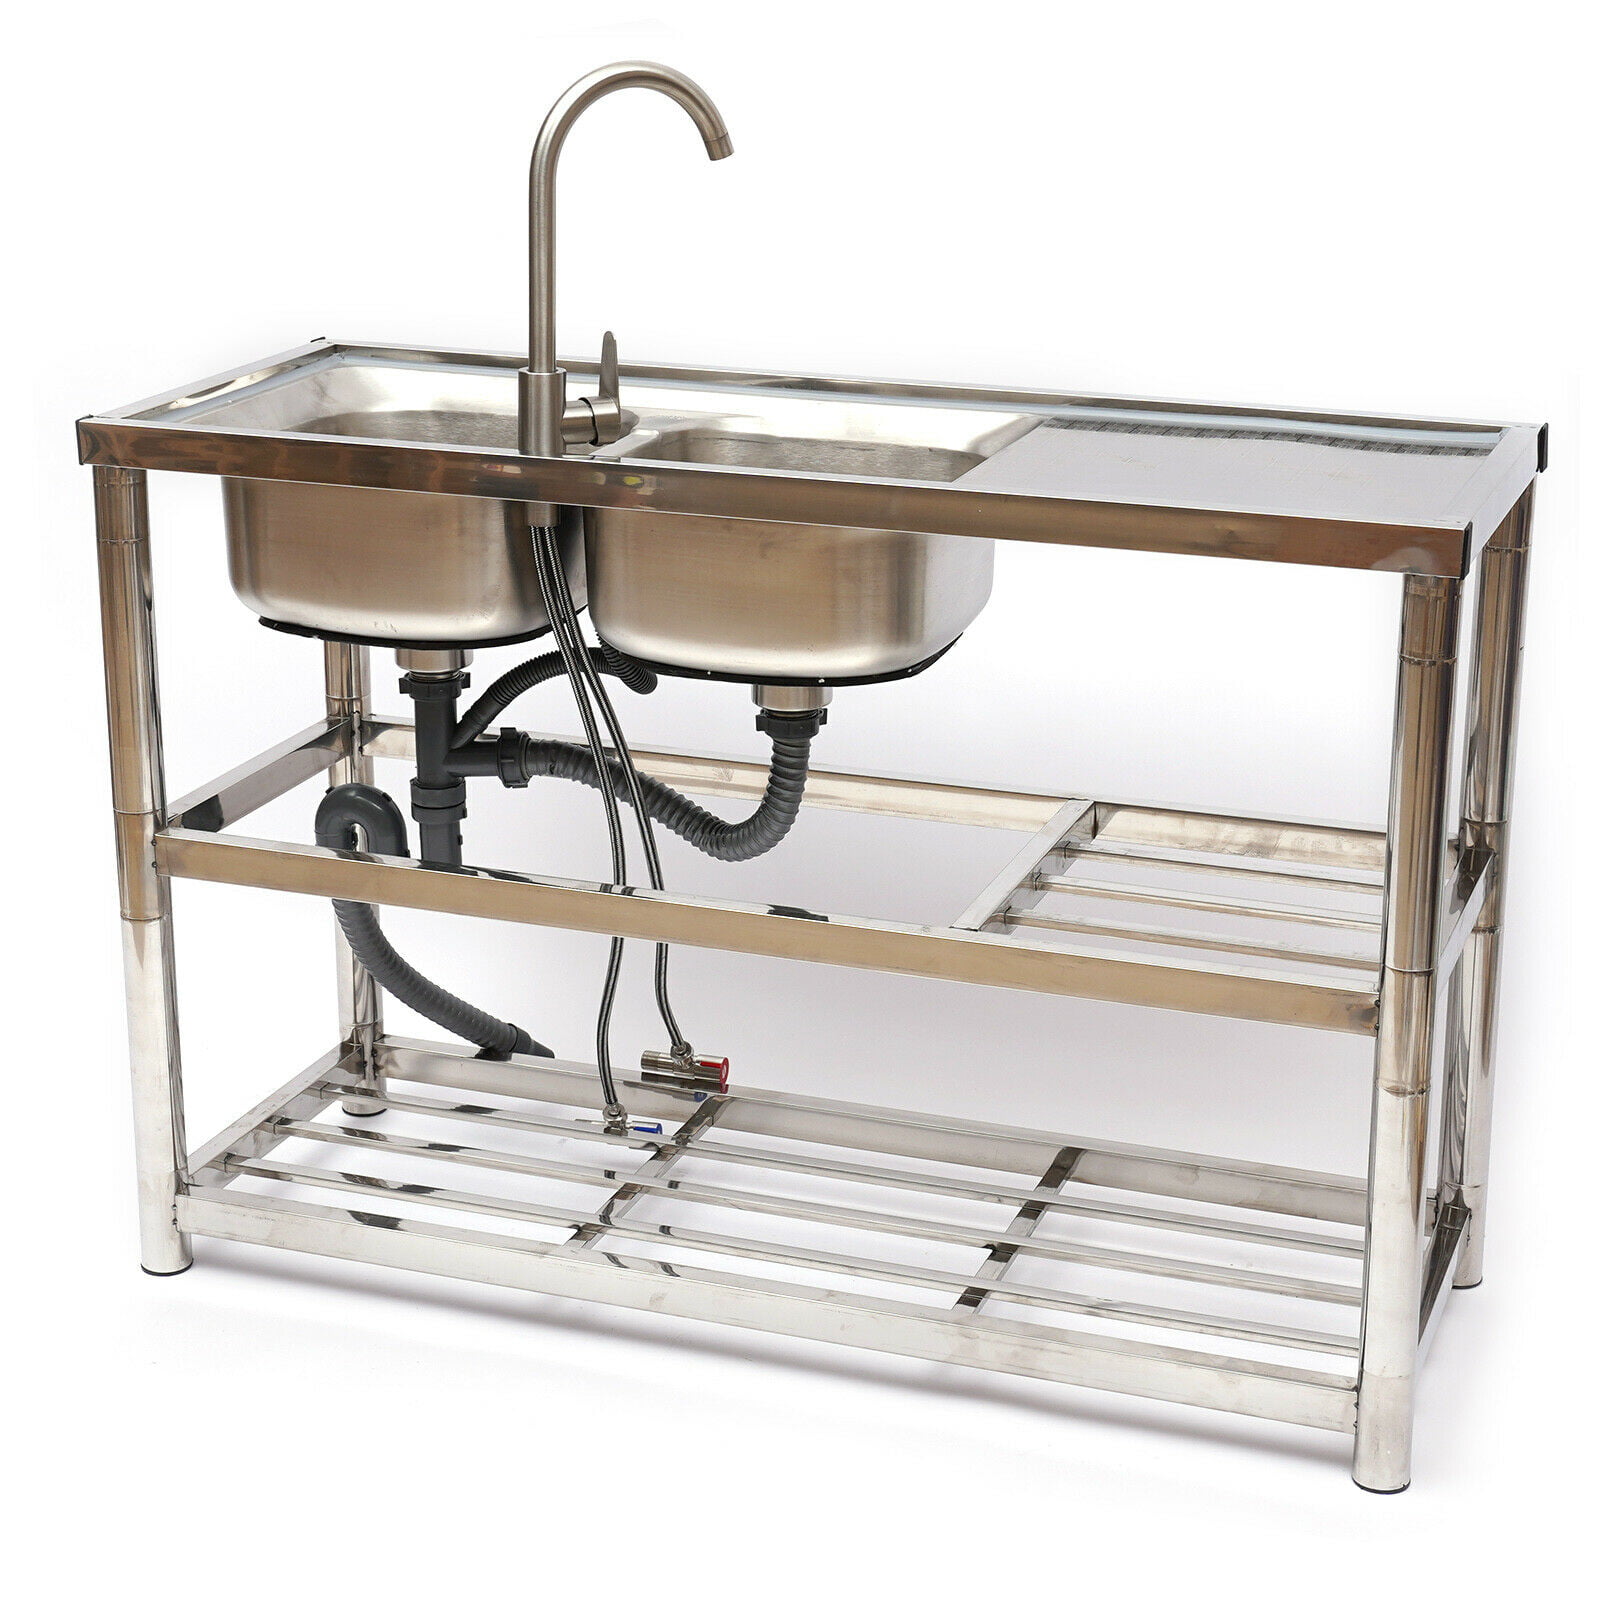 Commercial Sink  Stainless Steel Catering Kitchen Deep Bowl Drainer Wash Table 